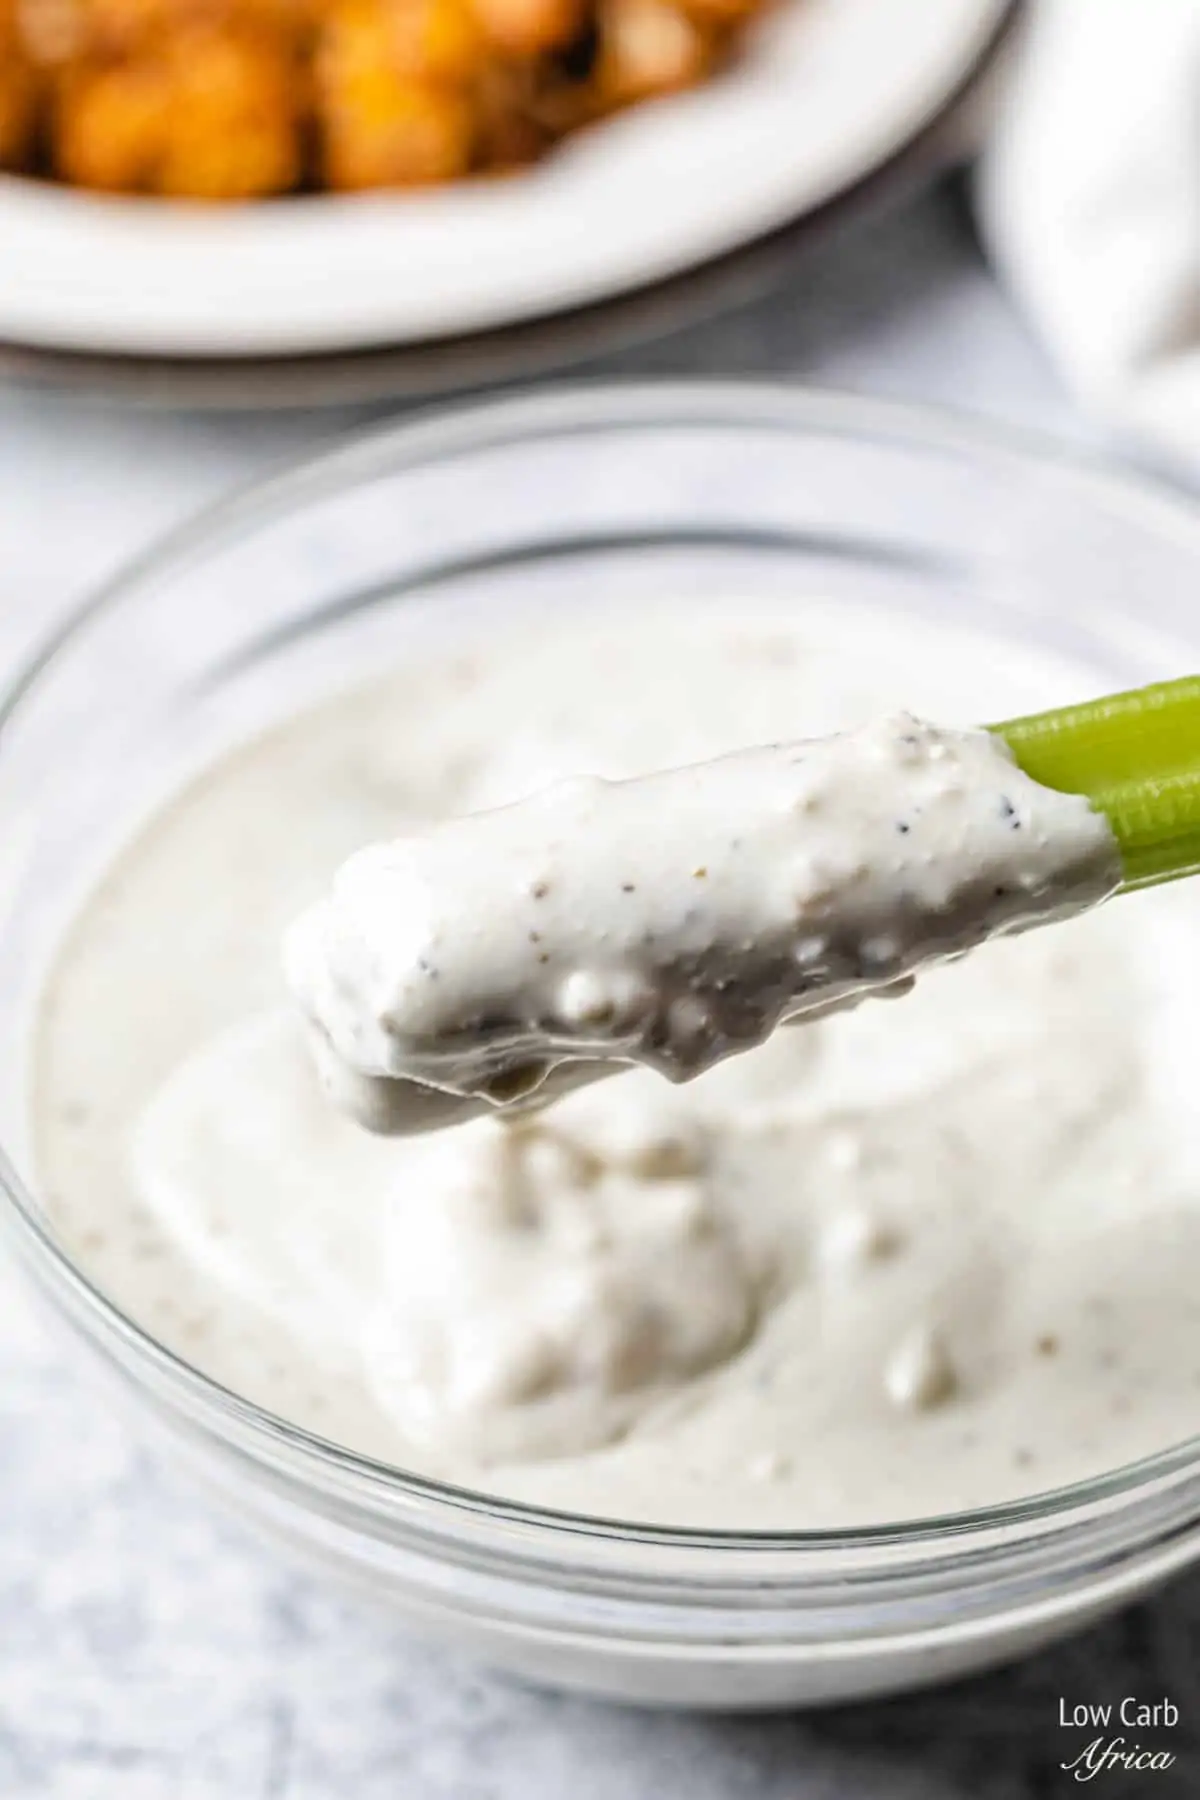 scooping out cheese dressing with celery.